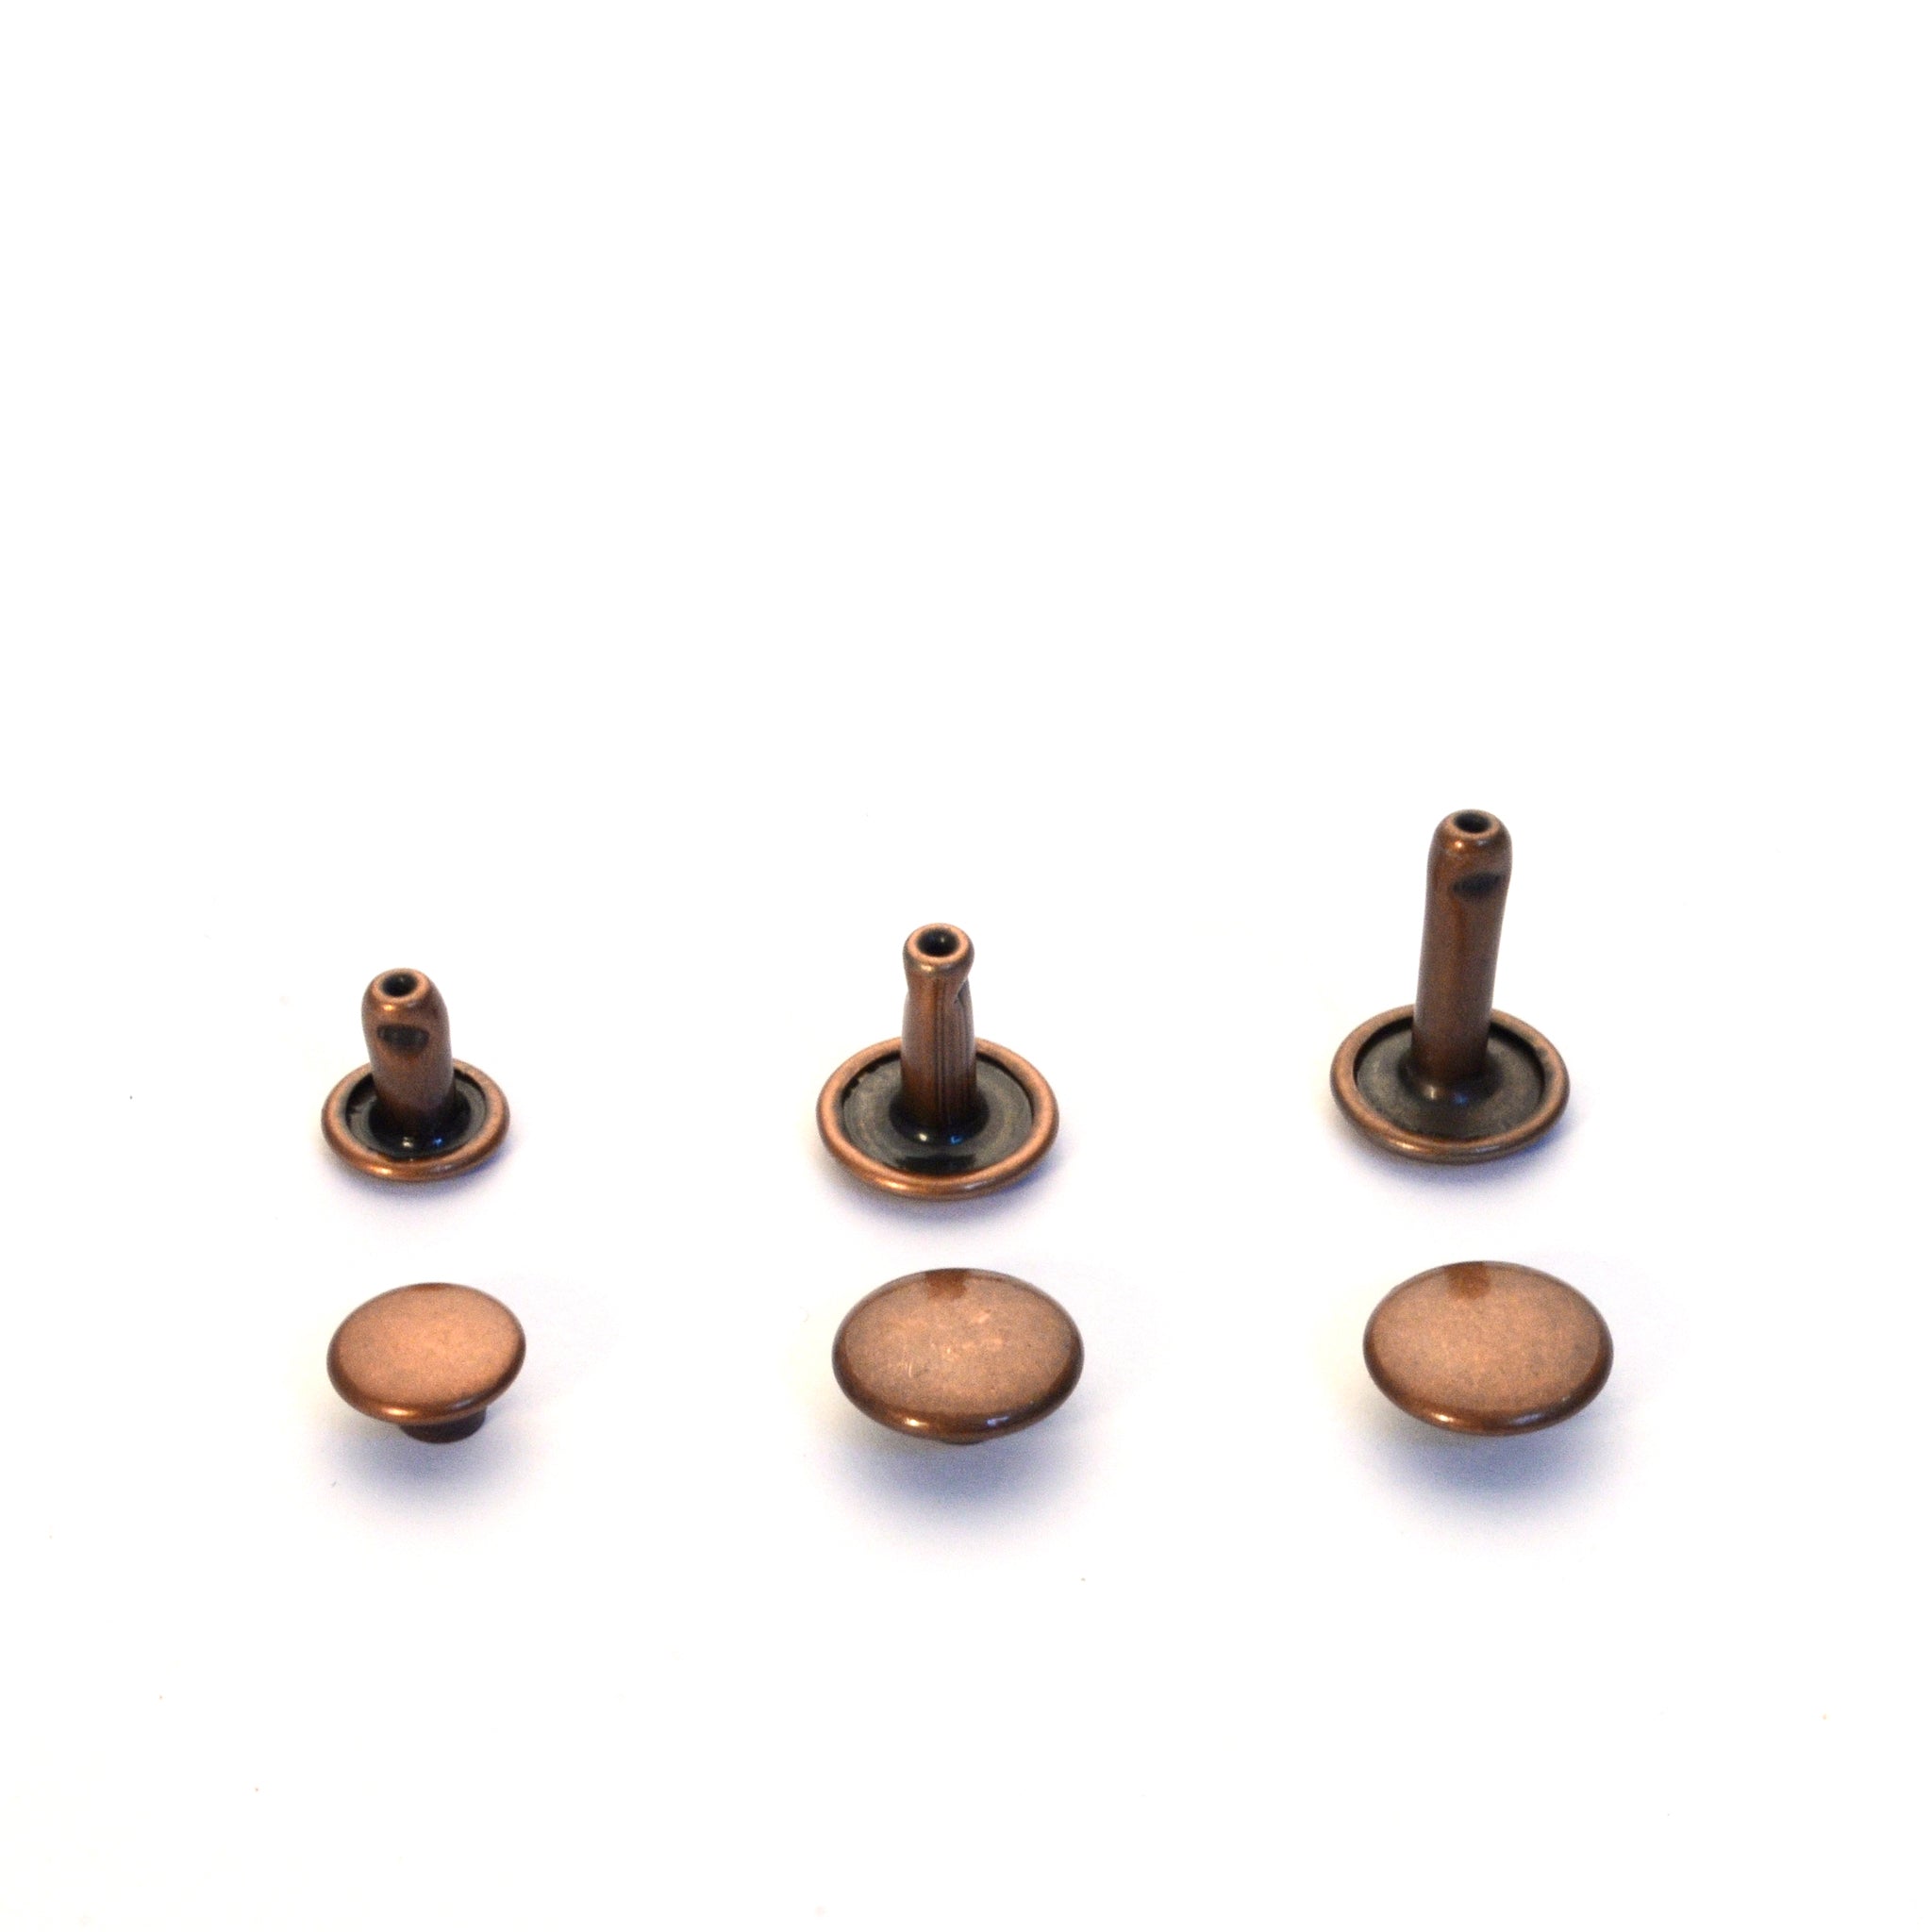 Wide Double Cap Rivets Assortment Pack- Antique Copper from Identity Leathercraft